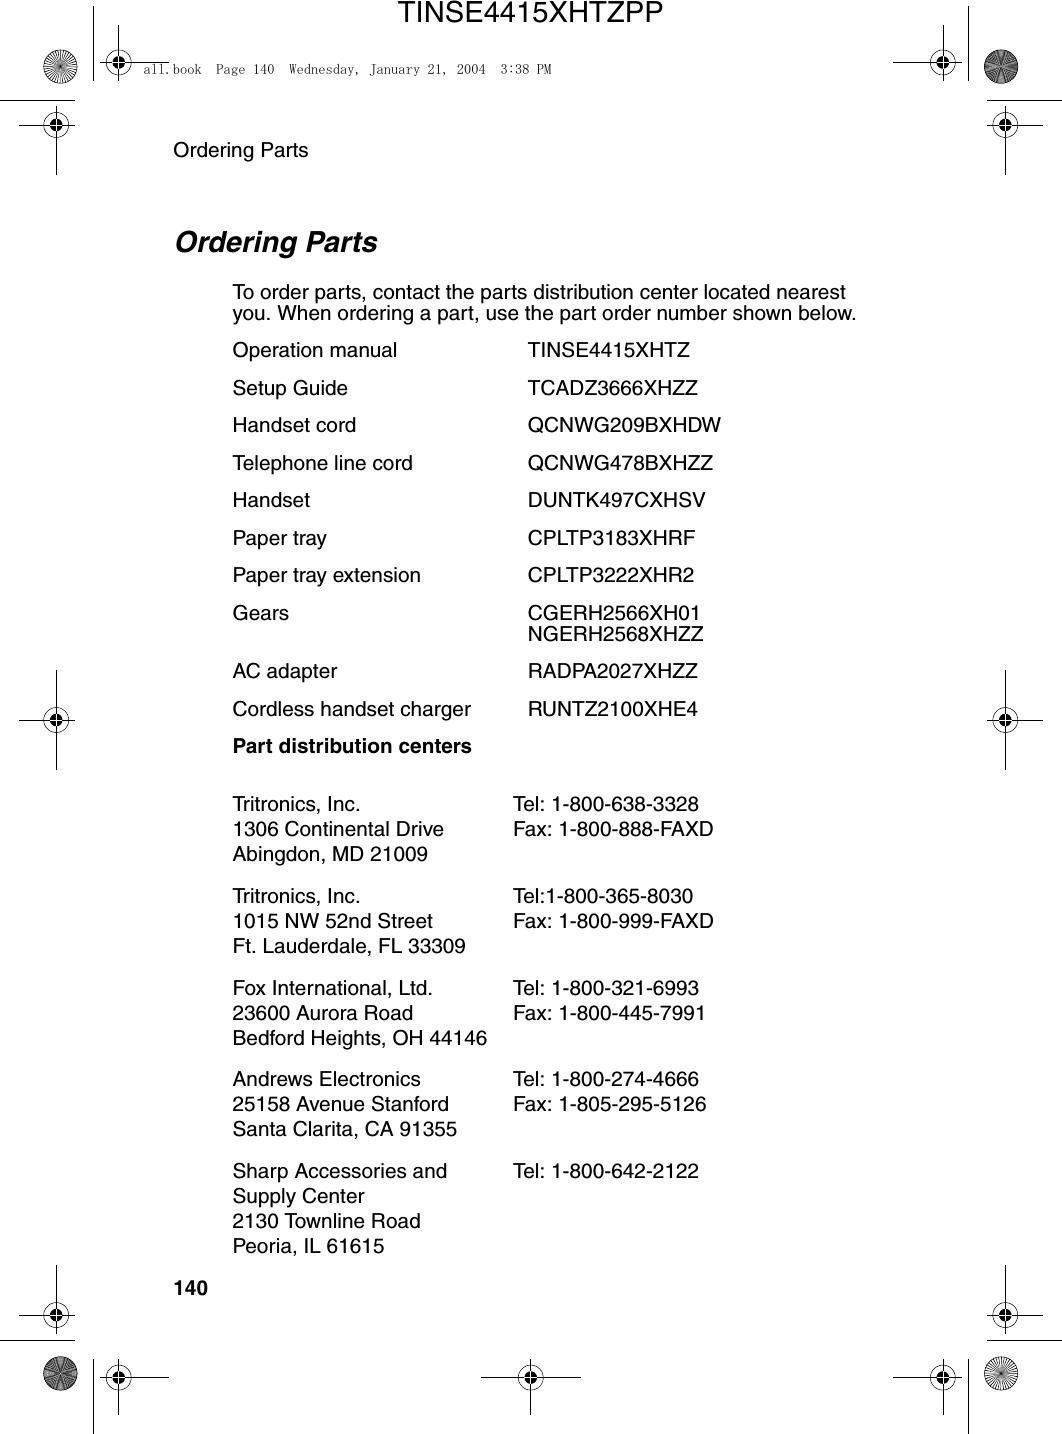 Ordering Parts140Ordering PartsTo order parts, contact the parts distribution center located nearest you. When ordering a part, use the part order number shown below. Operation manual  TINSE4415XHTZSetup Guide TCADZ3666XHZZHandset cord QCNWG209BXHDWTelephone line cord QCNWG478BXHZZHandset DUNTK497CXHSVPaper tray CPLTP3183XHRFPaper tray extension  CPLTP3222XHR2Gears CGERH2566XH01NGERH2568XHZZAC adapter RADPA2027XHZZCordless handset charger RUNTZ2100XHE4Part distribution centers Tritronics, Inc. 1306 Continental Drive Abingdon, MD 21009Tel: 1-800-638-3328 Fax: 1-800-888-FAXD Tritronics, Inc. 1015 NW 52nd Street Ft. Lauderdale, FL 33309Tel:1-800-365-8030 Fax: 1-800-999-FAXDFox International, Ltd. 23600 Aurora Road Bedford Heights, OH 44146Tel: 1-800-321-6993 Fax: 1-800-445-7991Andrews Electronics 25158 Avenue Stanford Santa Clarita, CA 91355Tel: 1-800-274-4666 Fax: 1-805-295-5126Sharp Accessories and Supply Center 2130 Townline Road Peoria, IL 61615Tel: 1-800-642-2122all.book  Page 140  Wednesday, January 21, 2004  3:38 PMTINSE4415XHTZPP